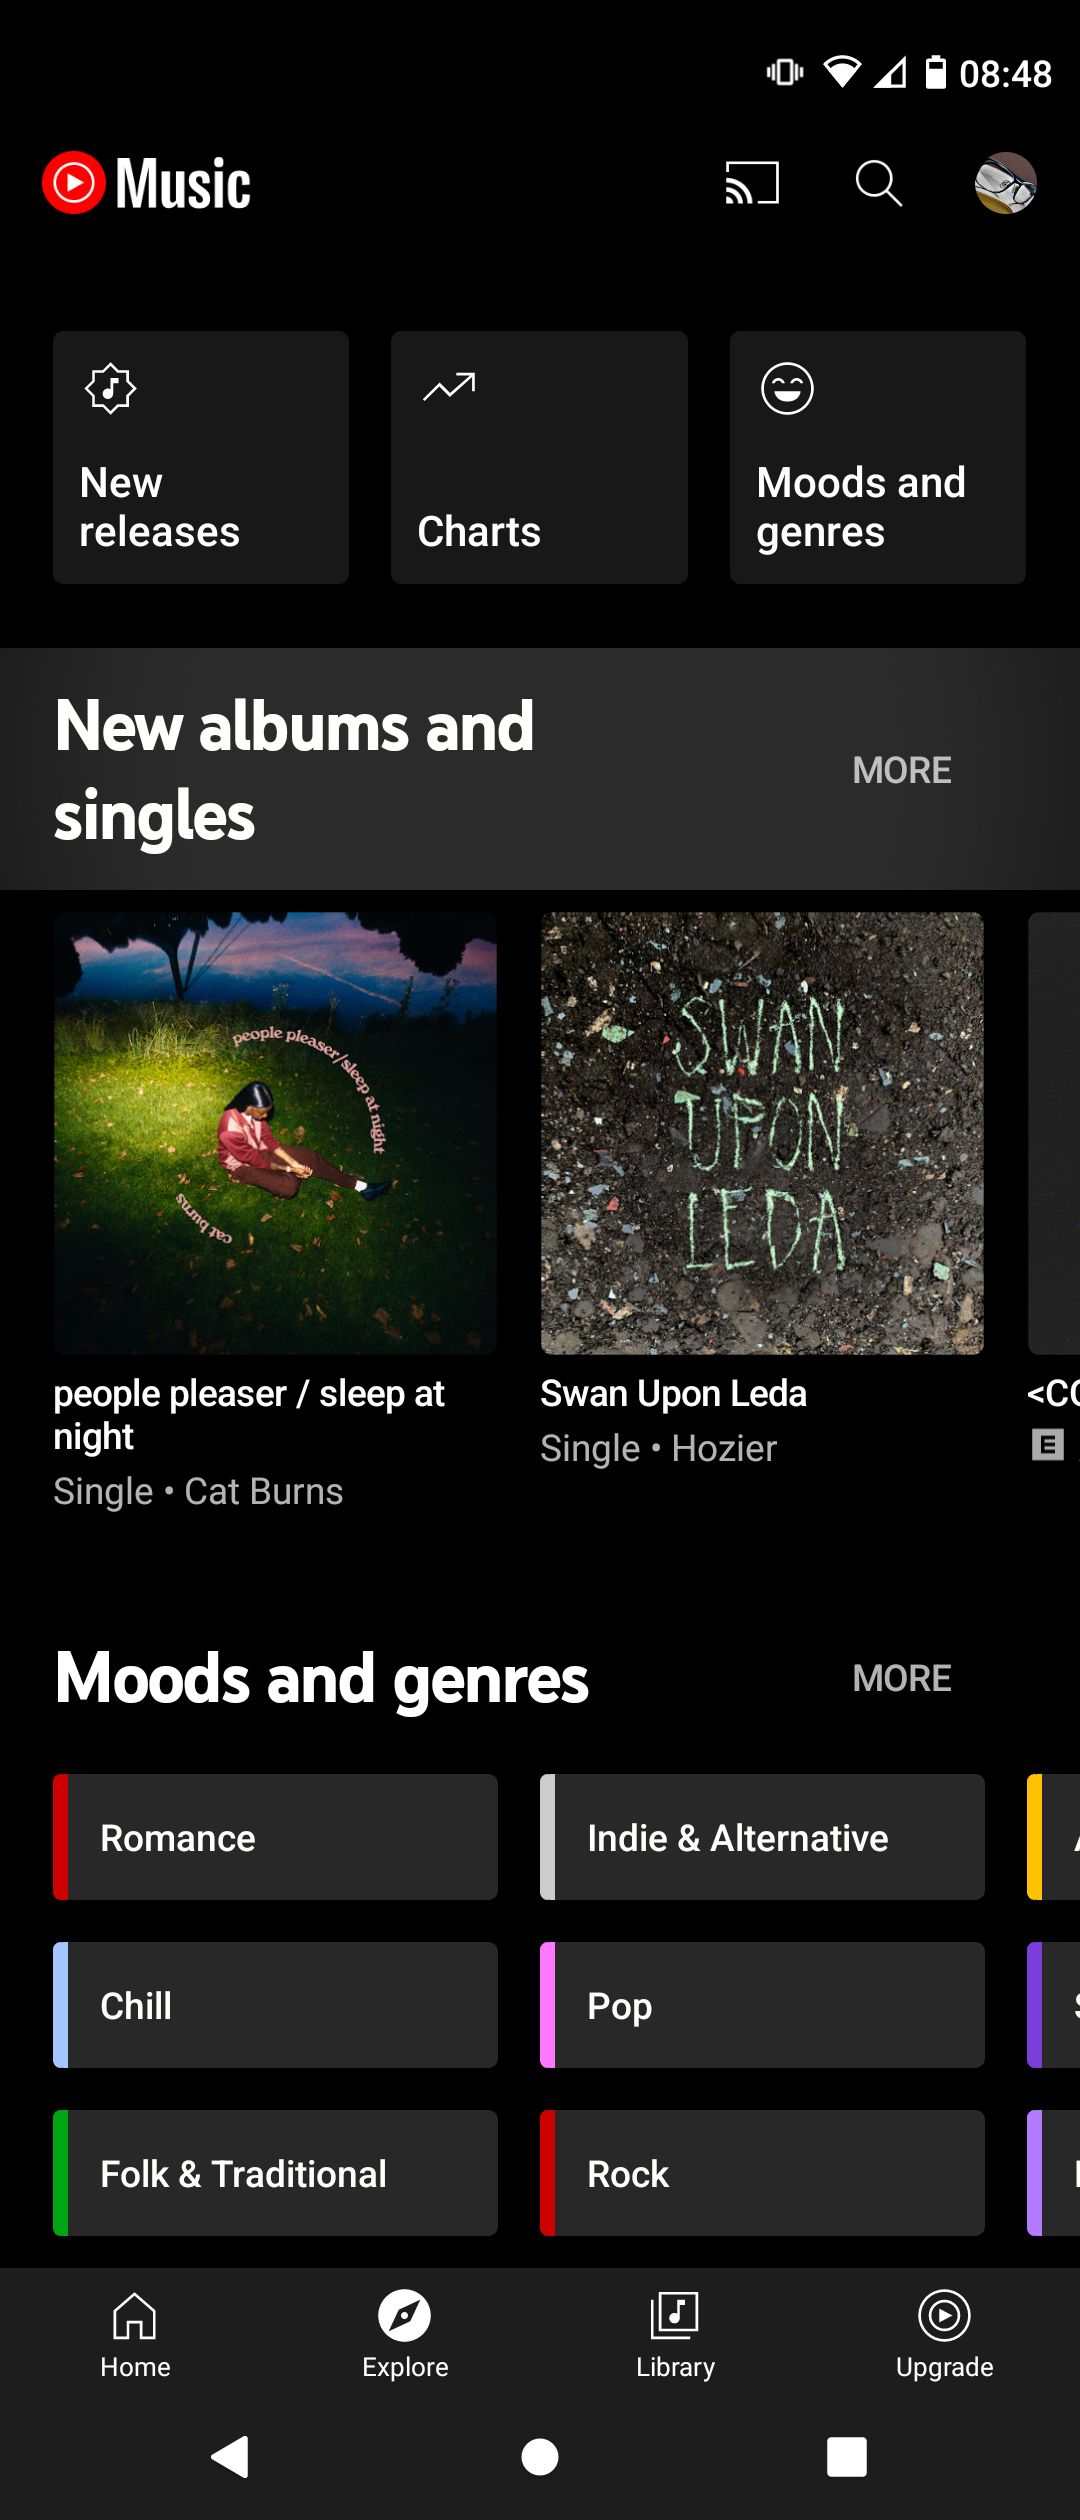 Exploring Categories on YouTube Music Android App